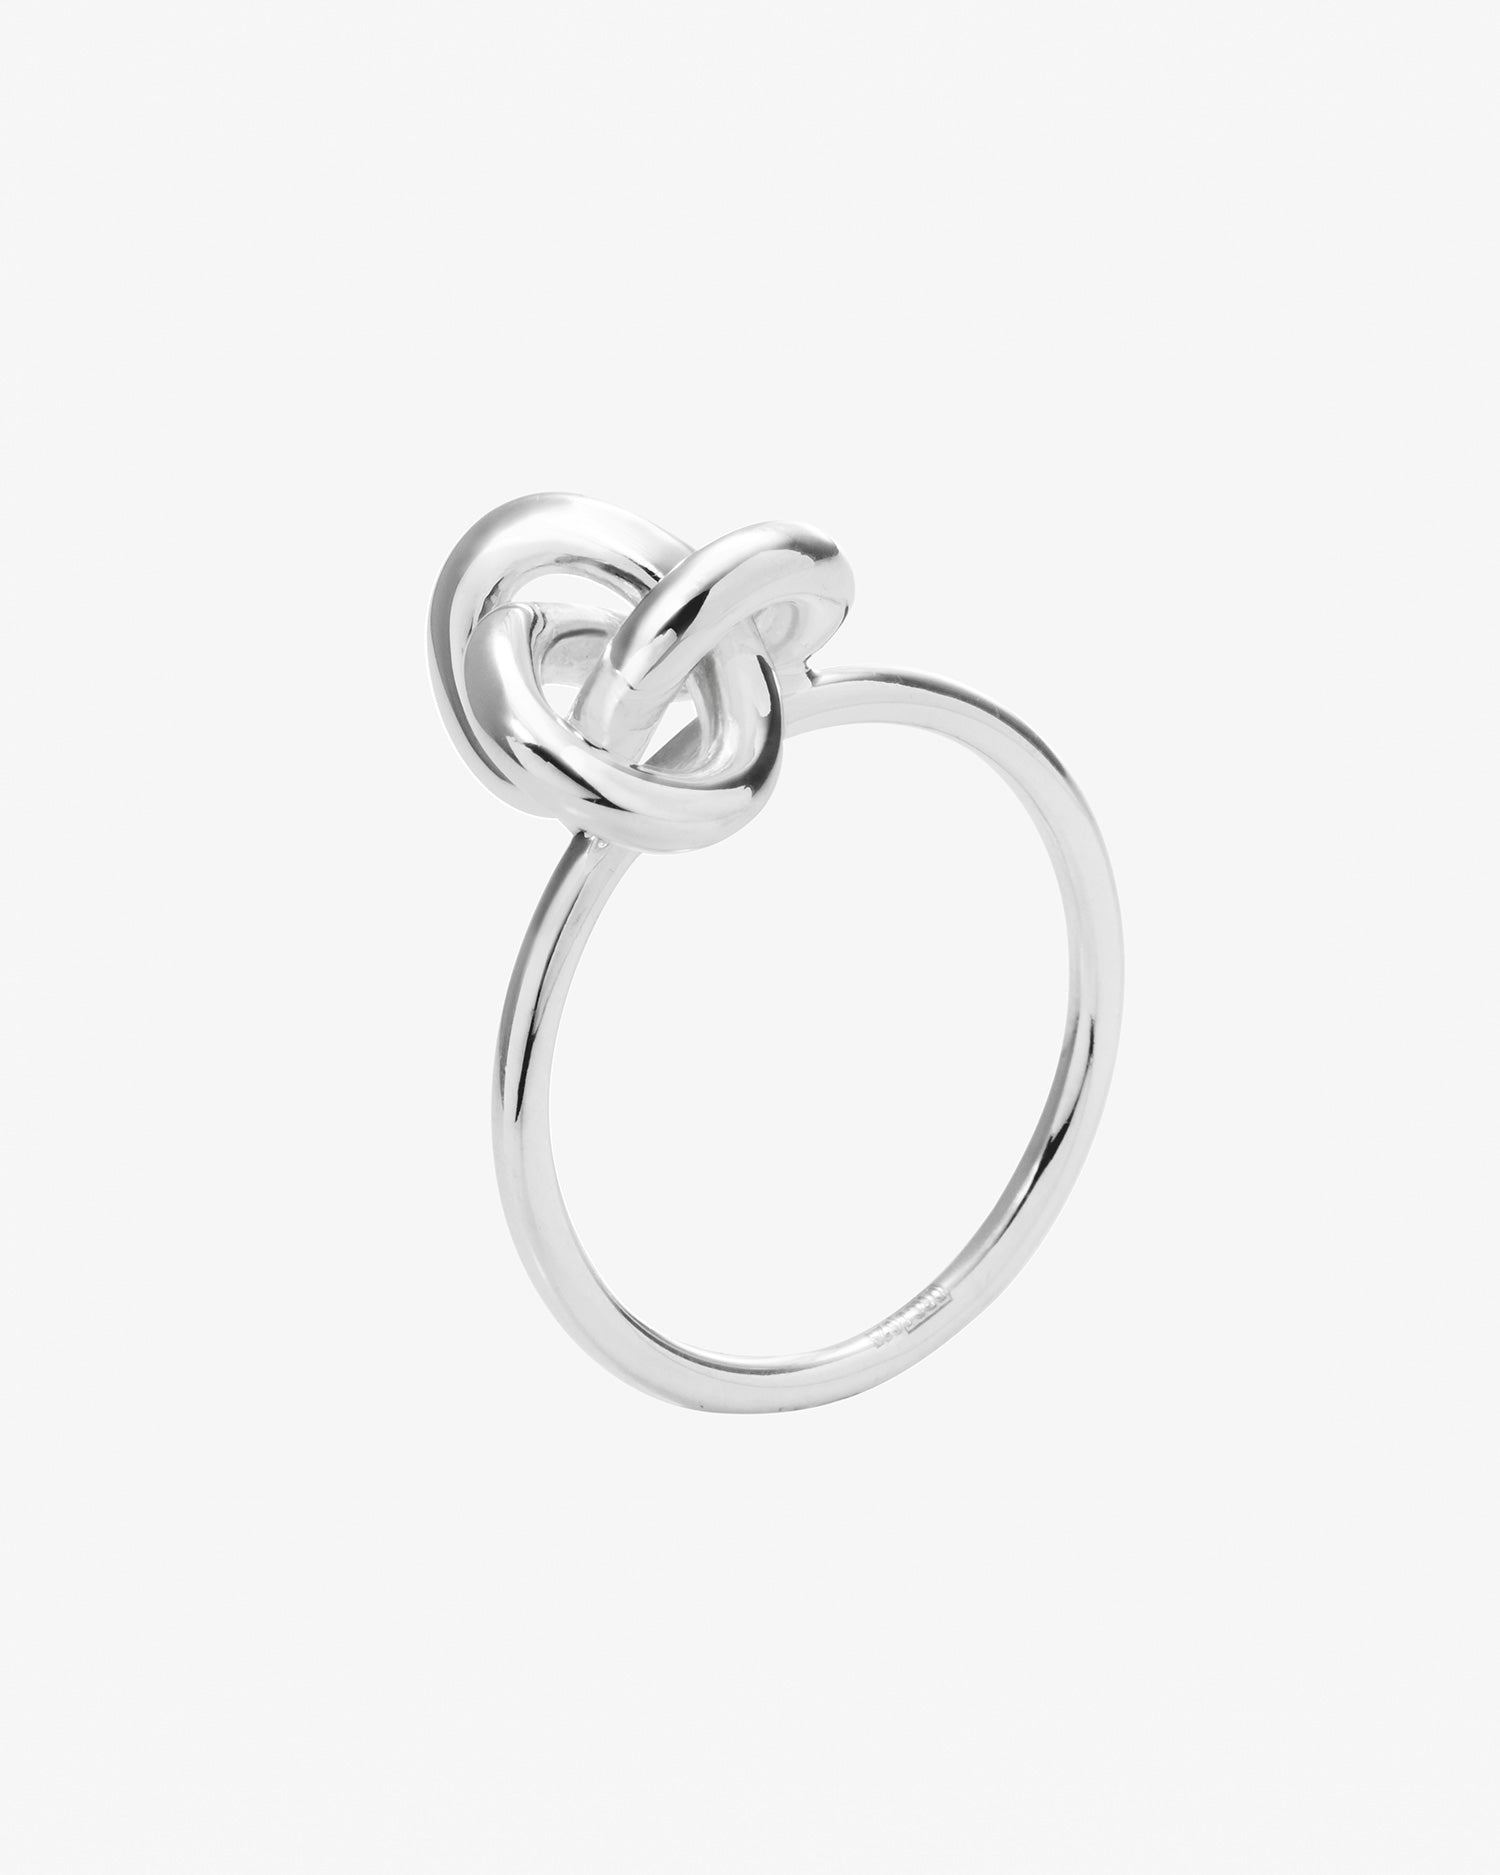 le-knot-ring-002